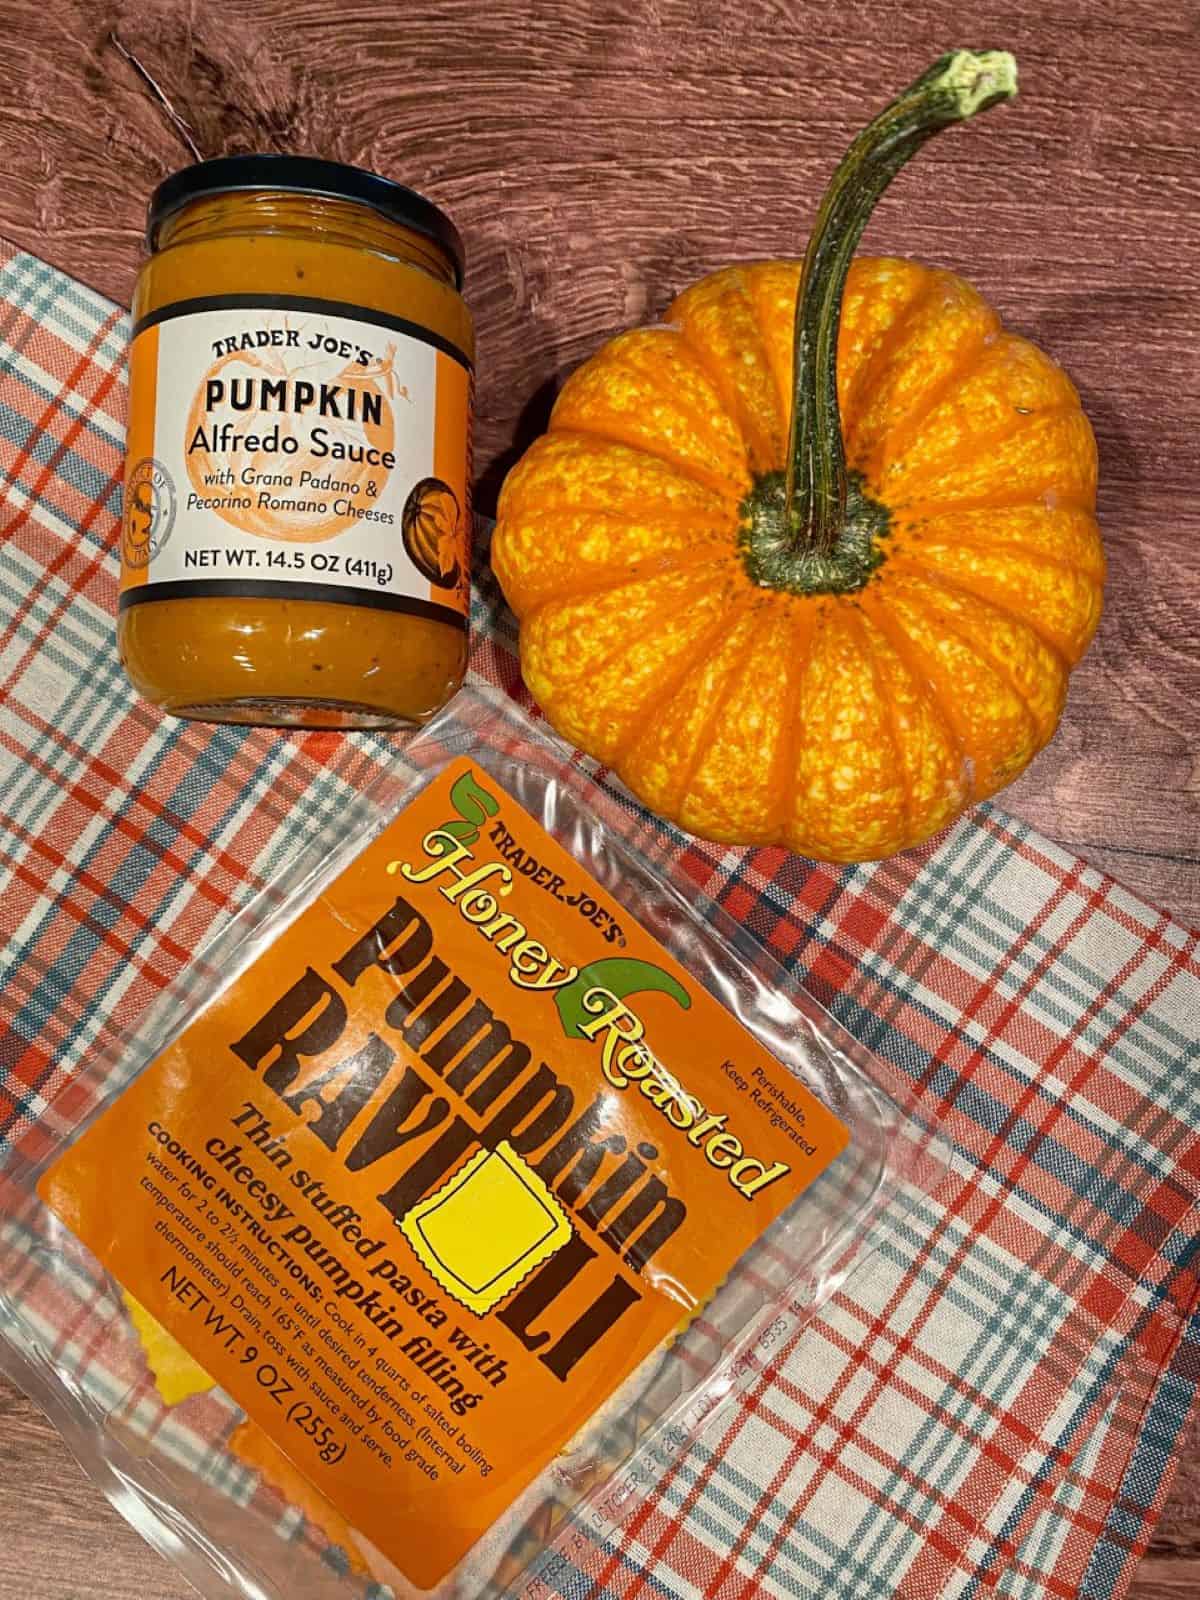 Ingredients needed to make this recipe, pumpkin ravioli and a jar of alfredo sauce, are on a wooden table with an orange and blue fall towel.